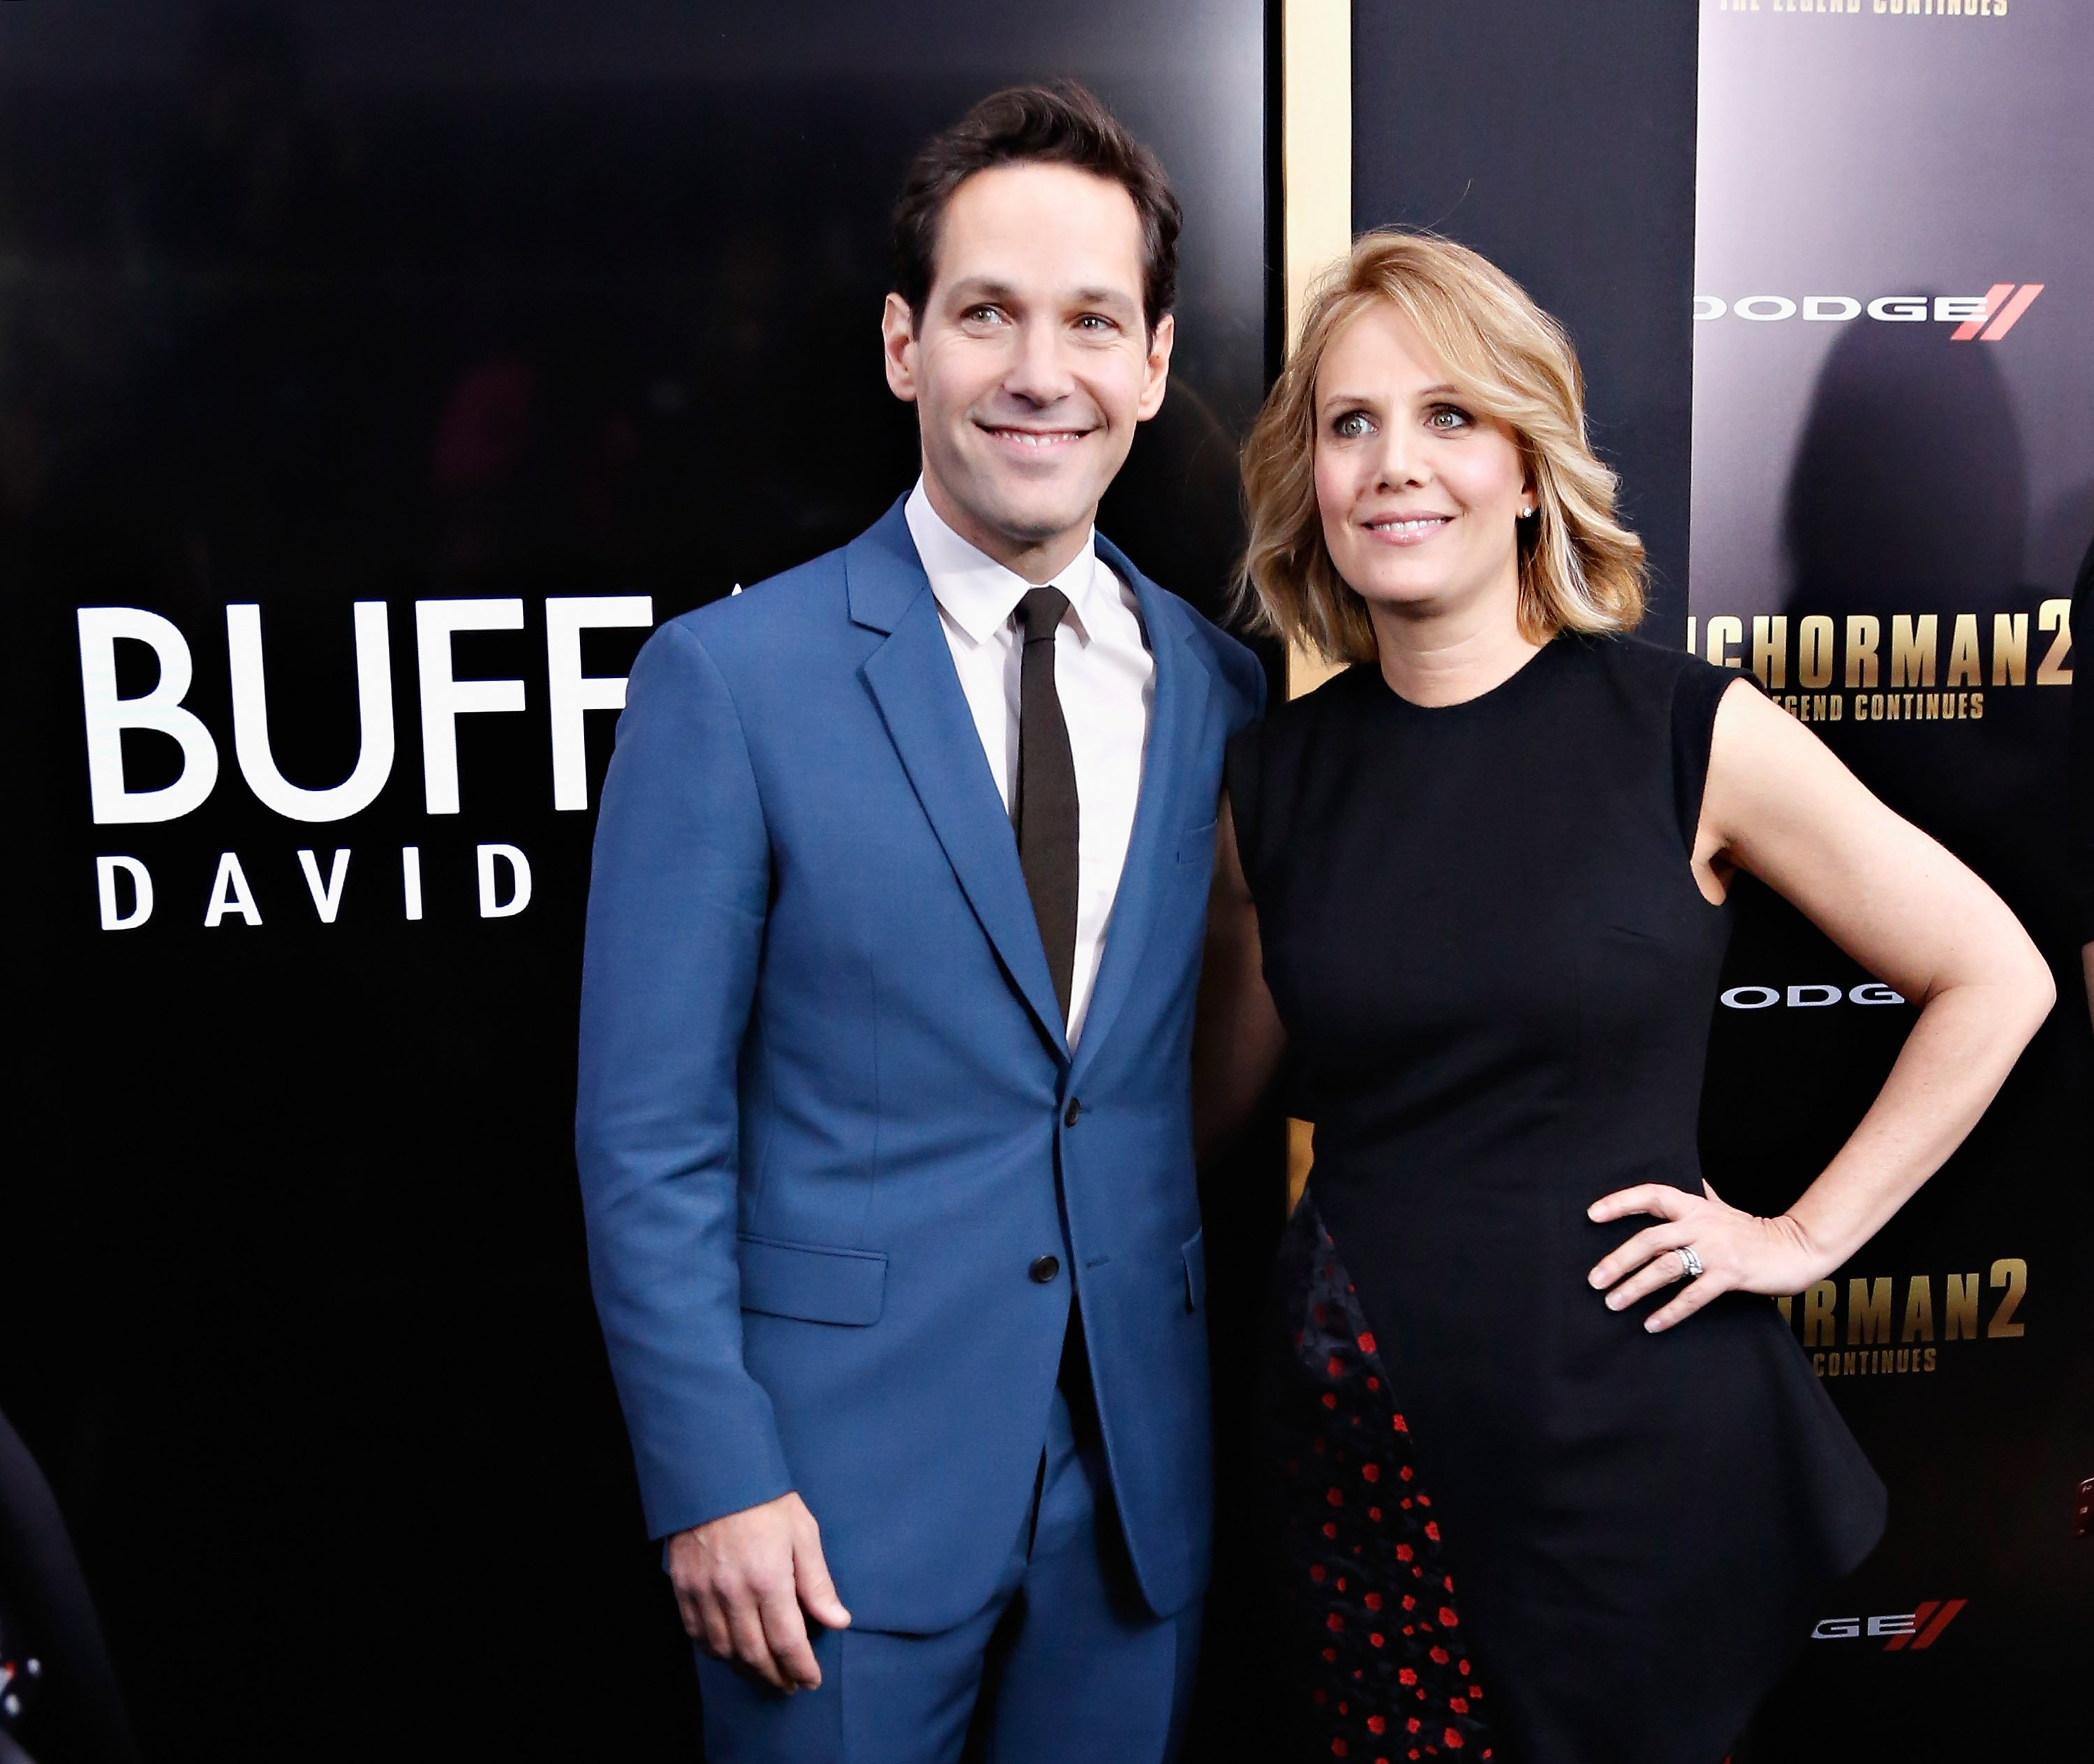 Paul Rudd and his wife Julie Yaeger attend the "Anchorman 2: The Legend Continues" premiere on December 15, 2013, in New York City. | Source: Getty Images